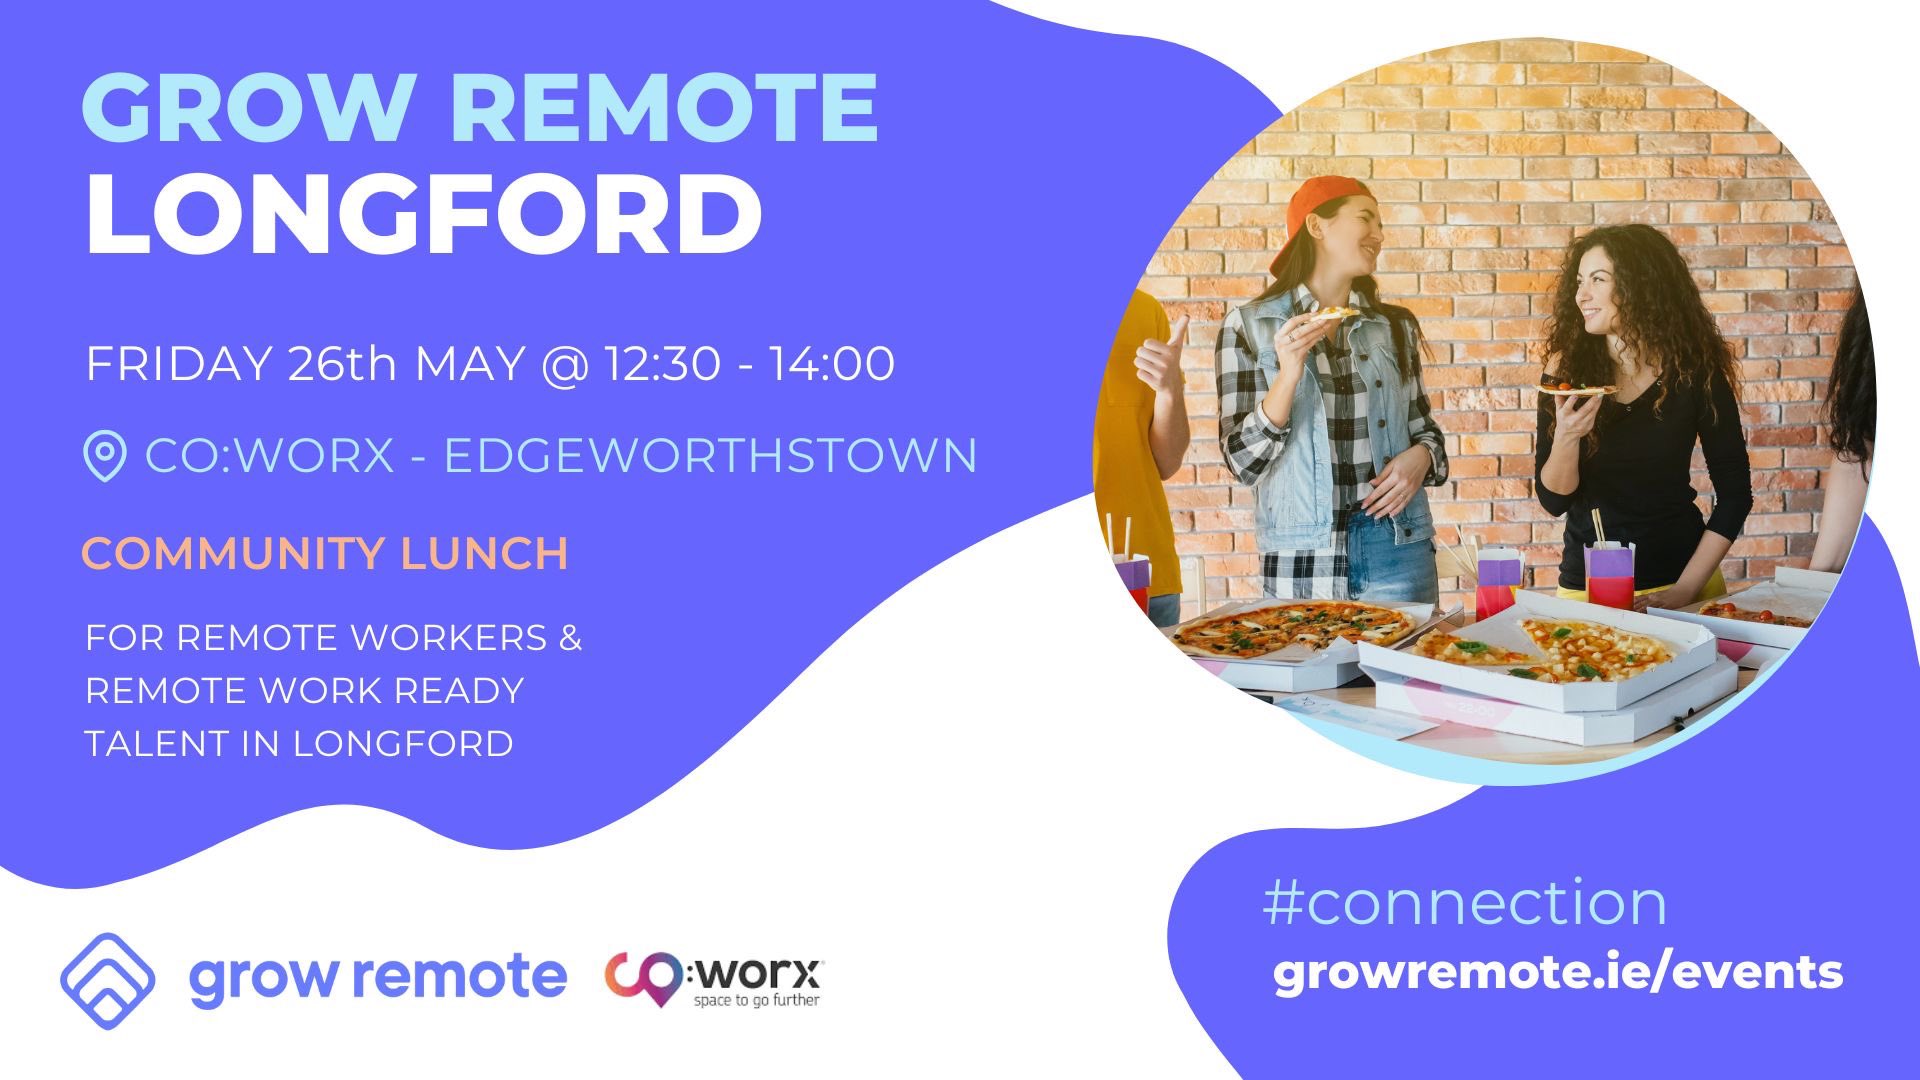 Grow Remote Longford - Community Lunch